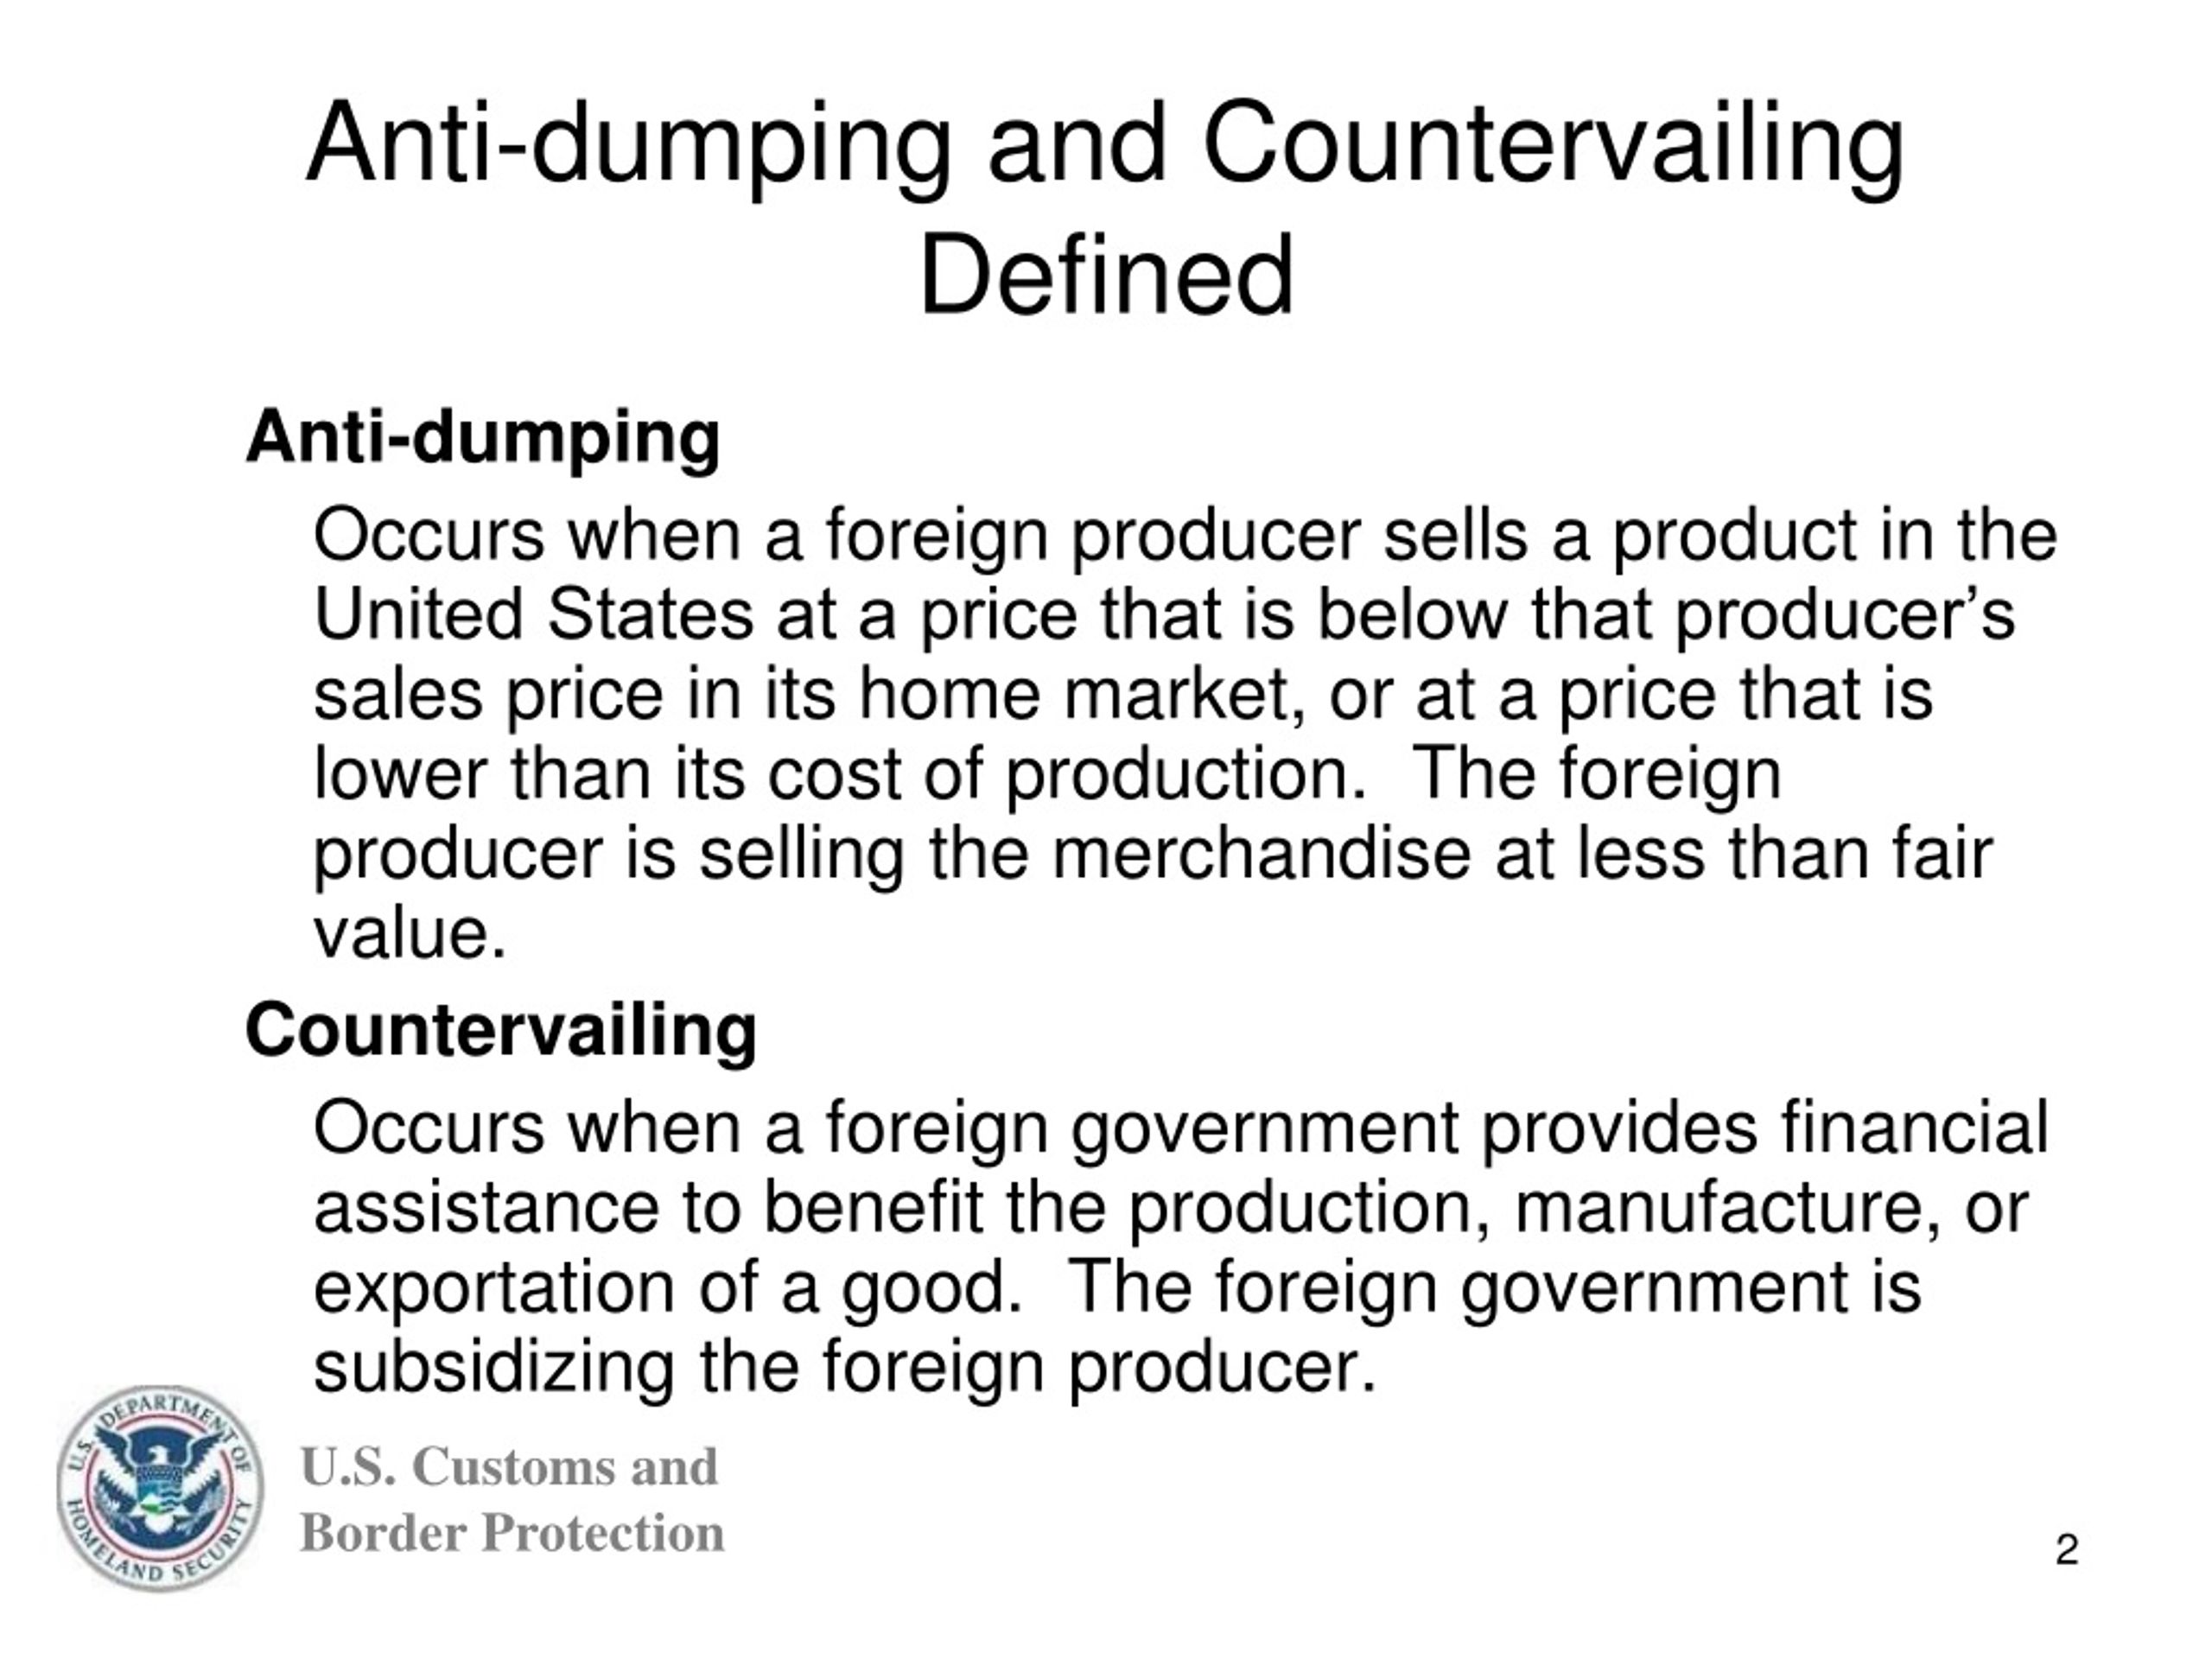 PPT ANTIDUMPING AND COUNTERVAILING DUTY PowerPoint Presentation